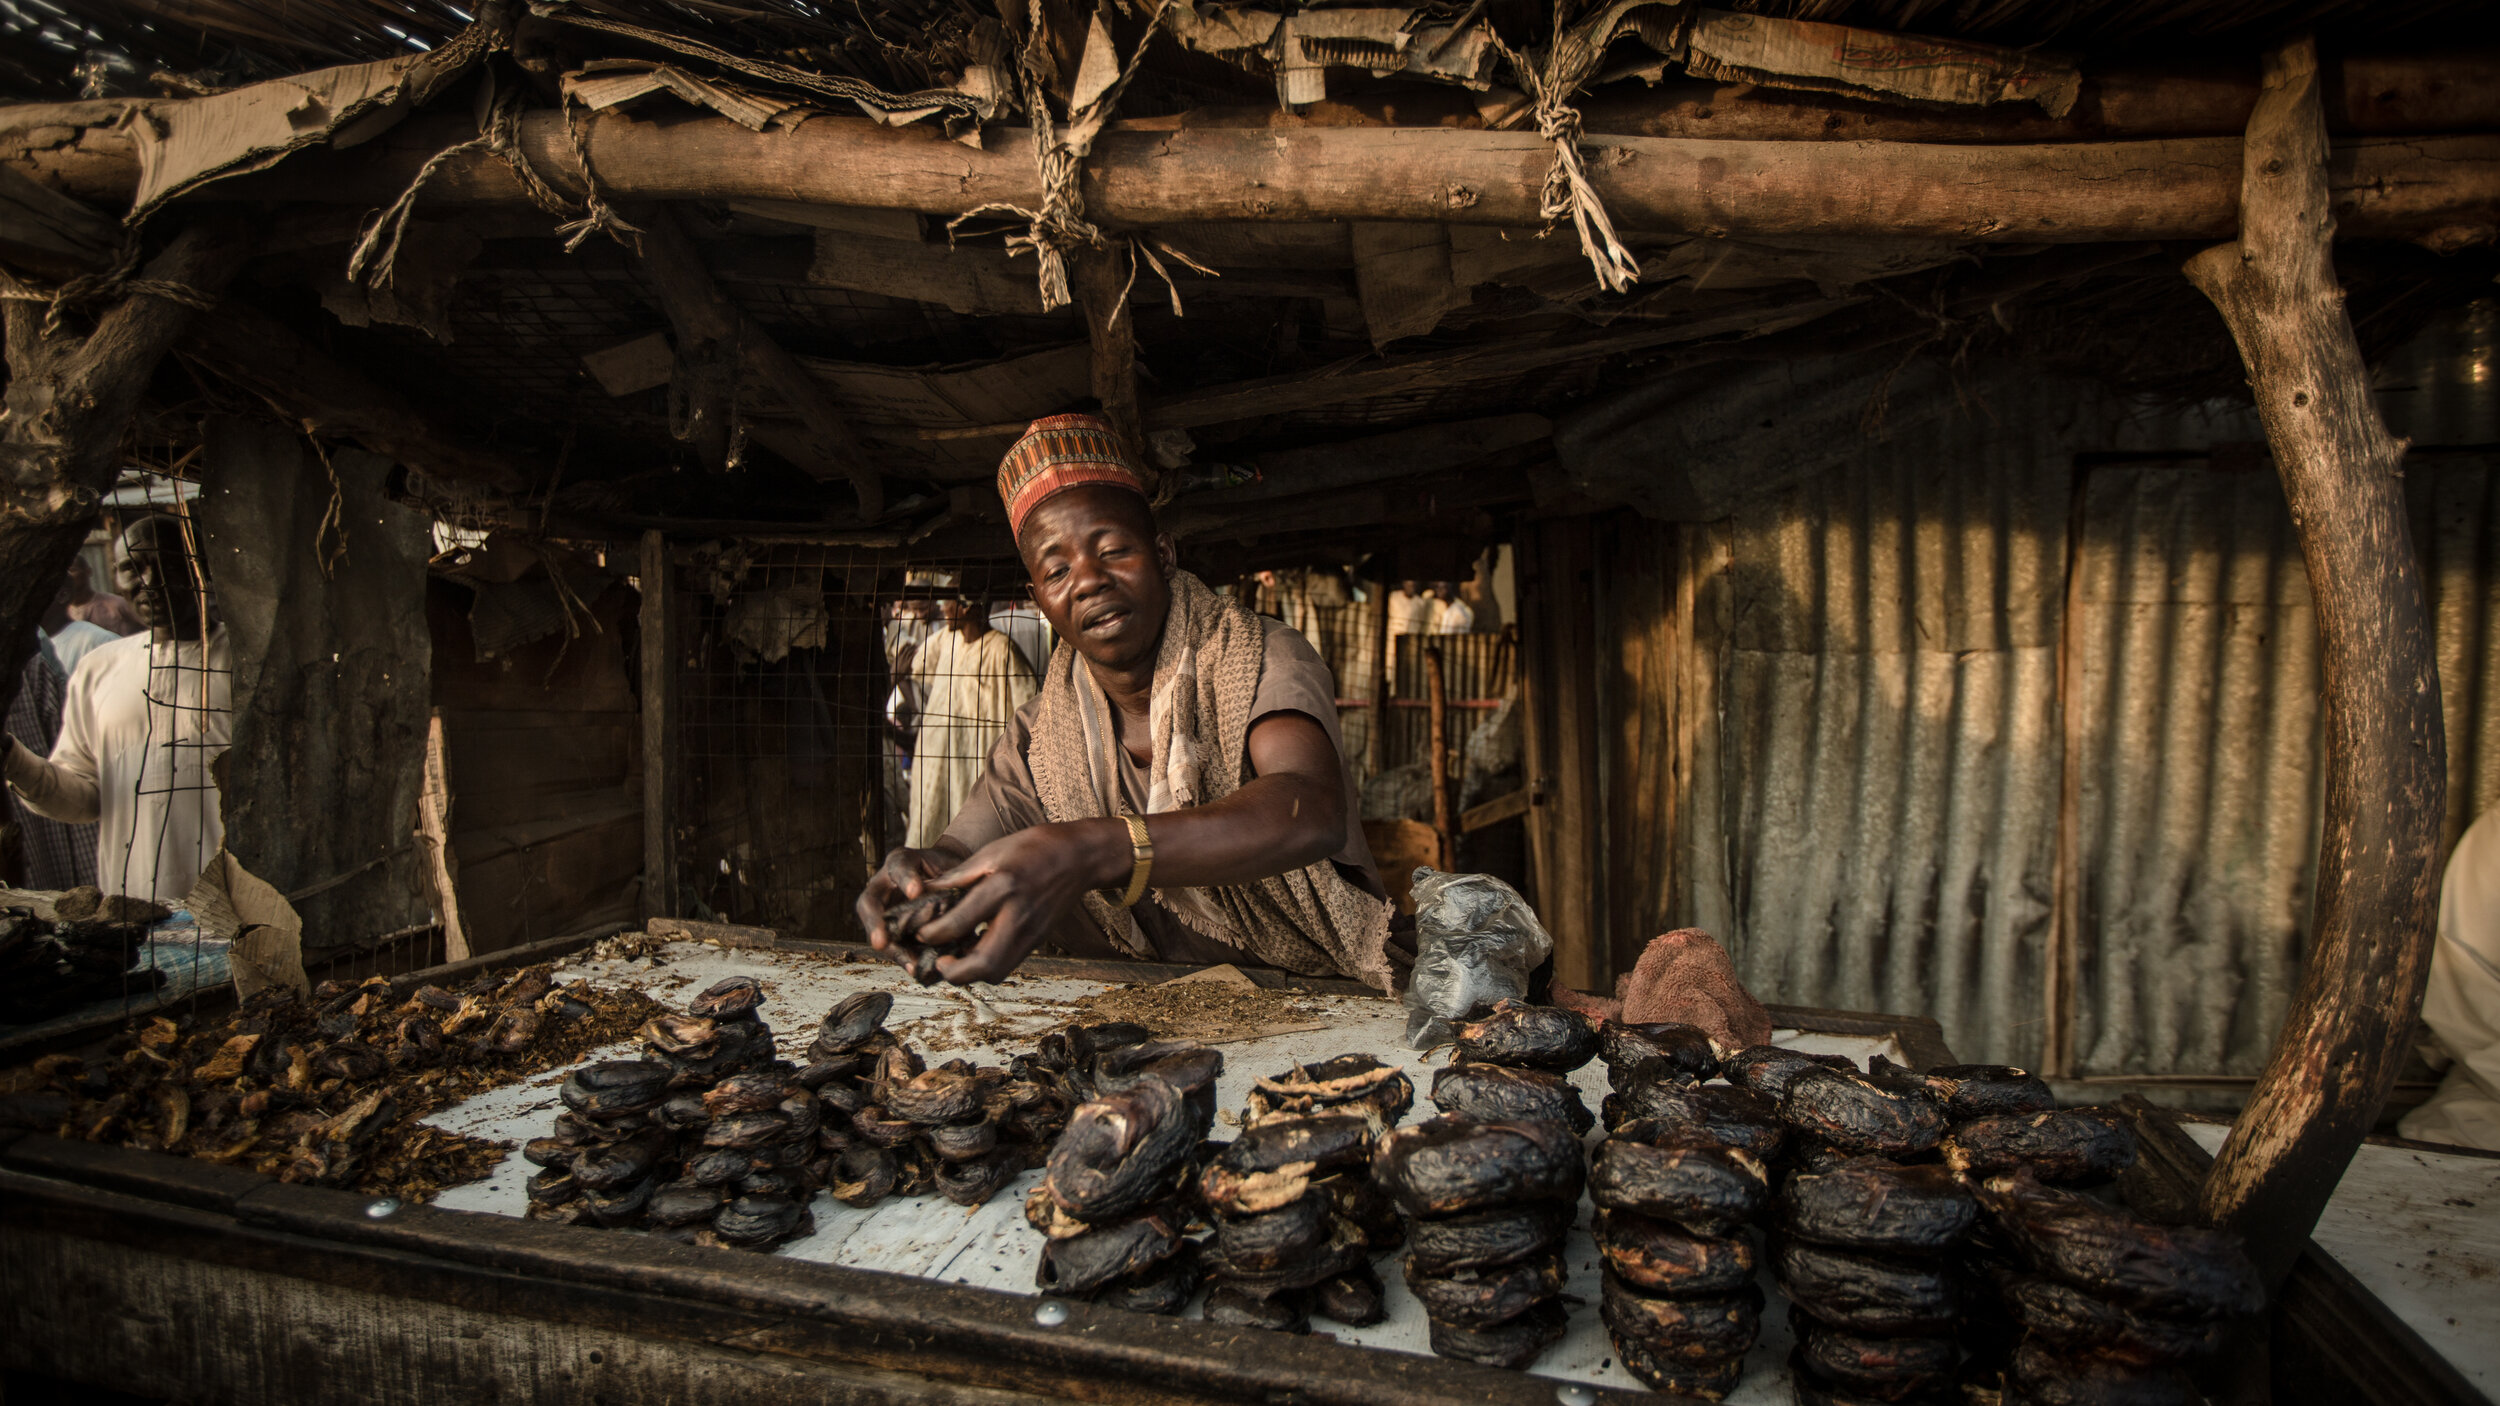  dried sheep meat being carefully displayed at sunset in the market of Monguno, northeastern Nigeria. November 2018 